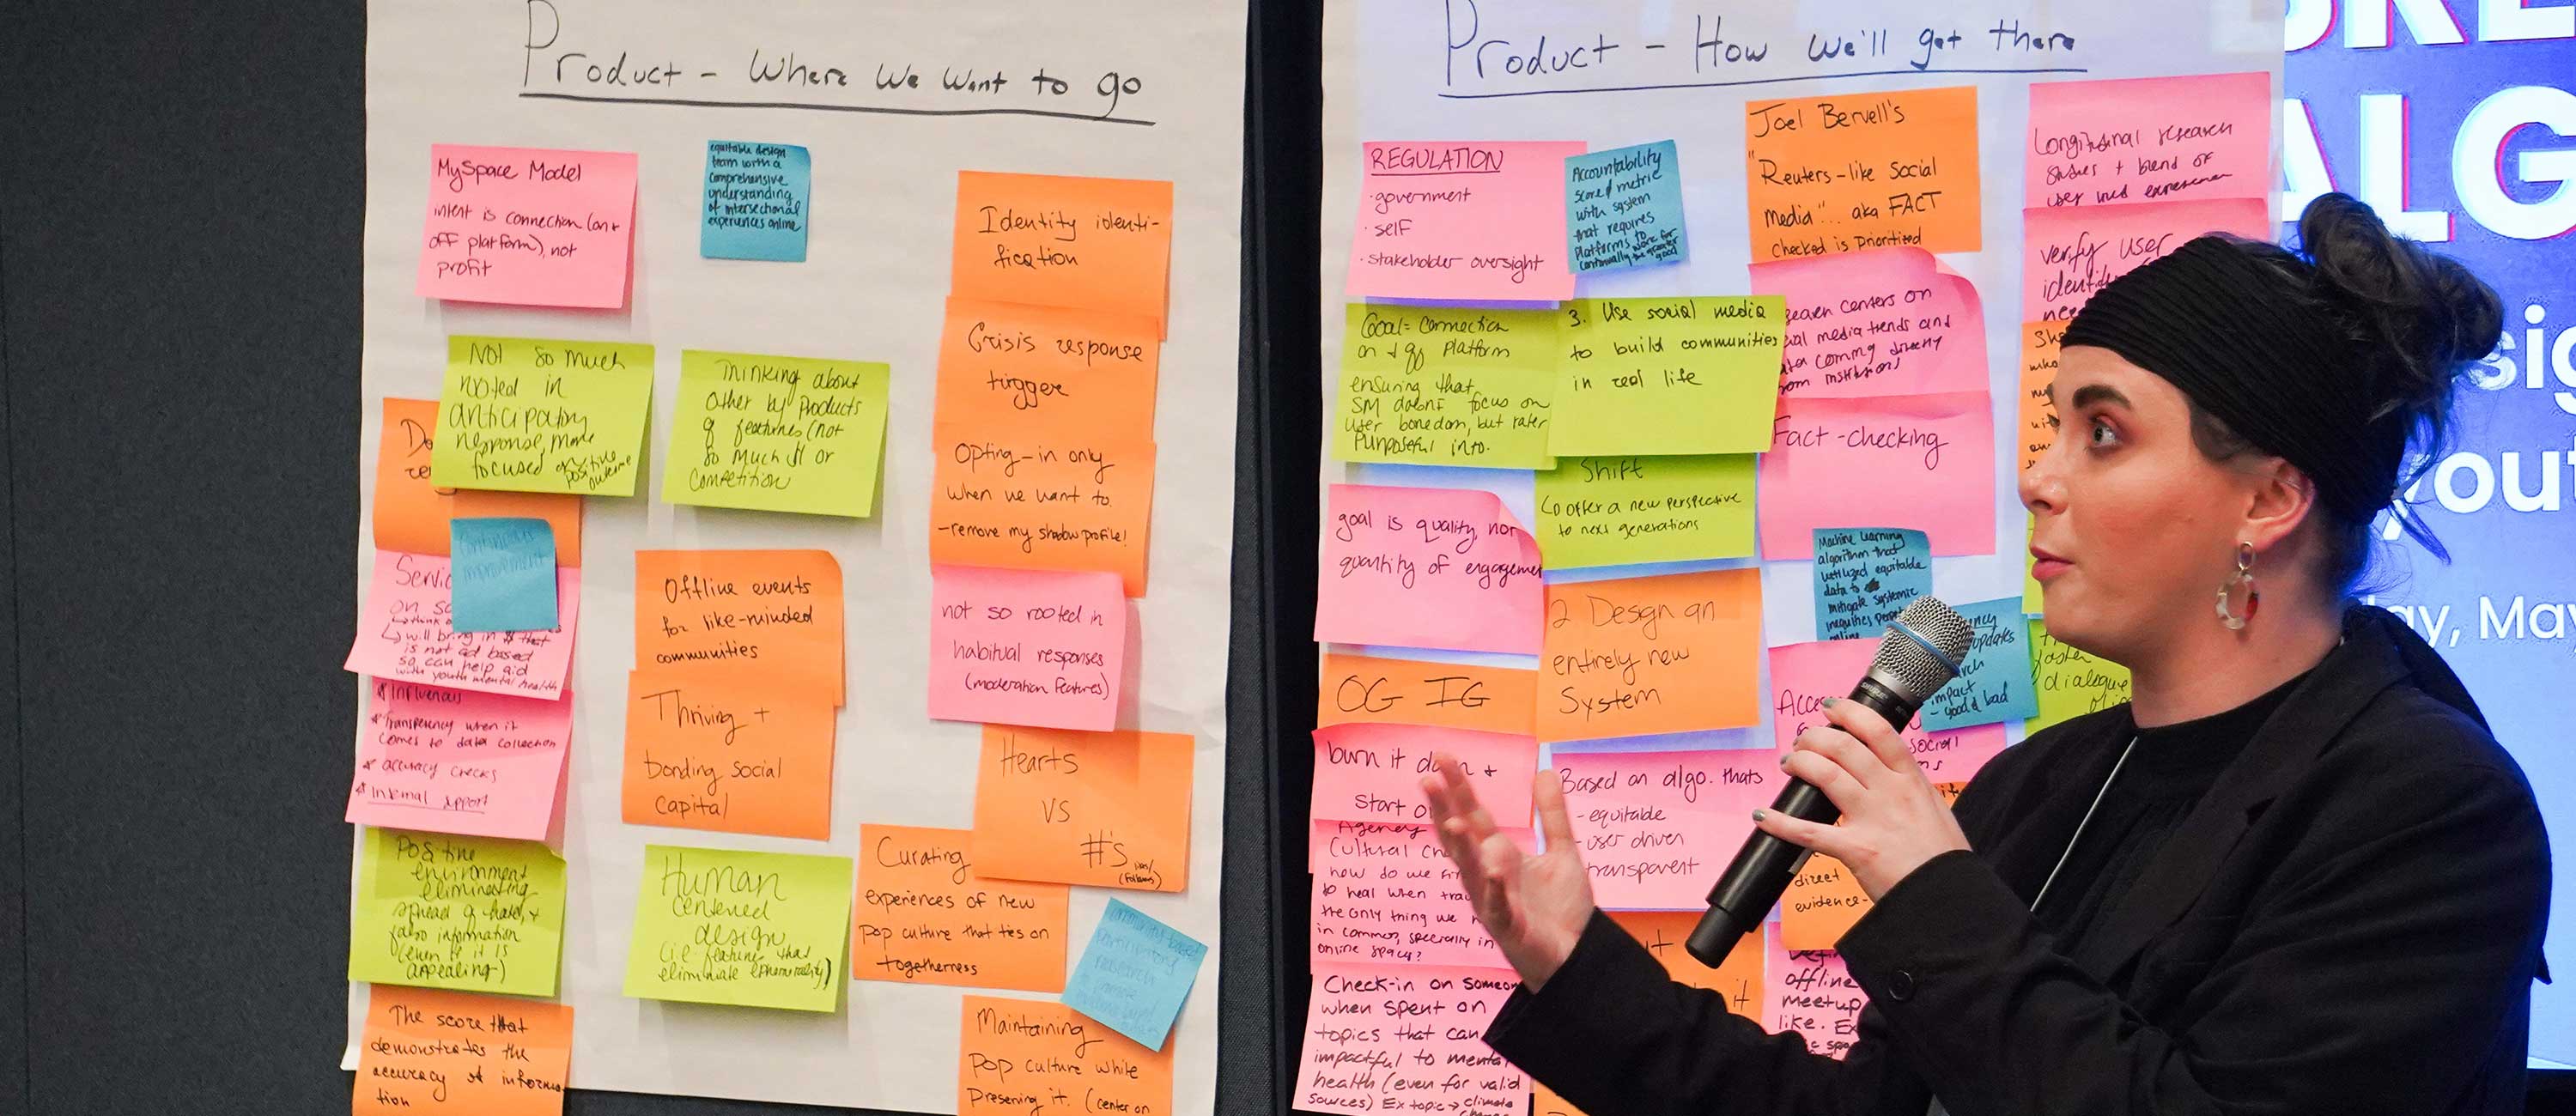 person stands in front of posterboards covered in sticky notes while speaking into microphone